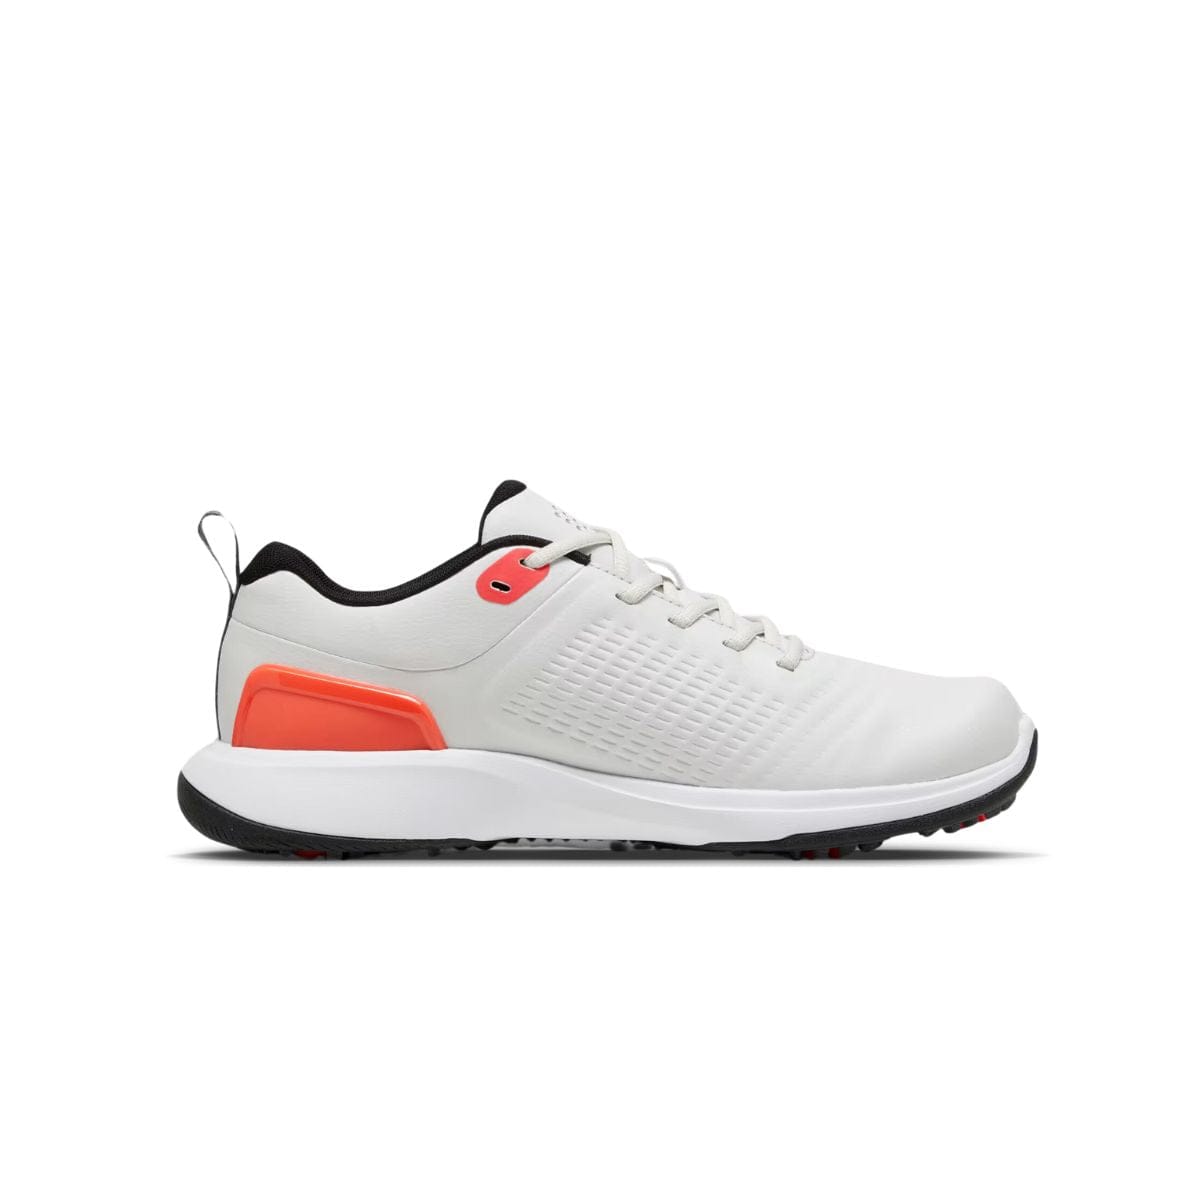 Puma Golf Shoes Replacement Shoelaces